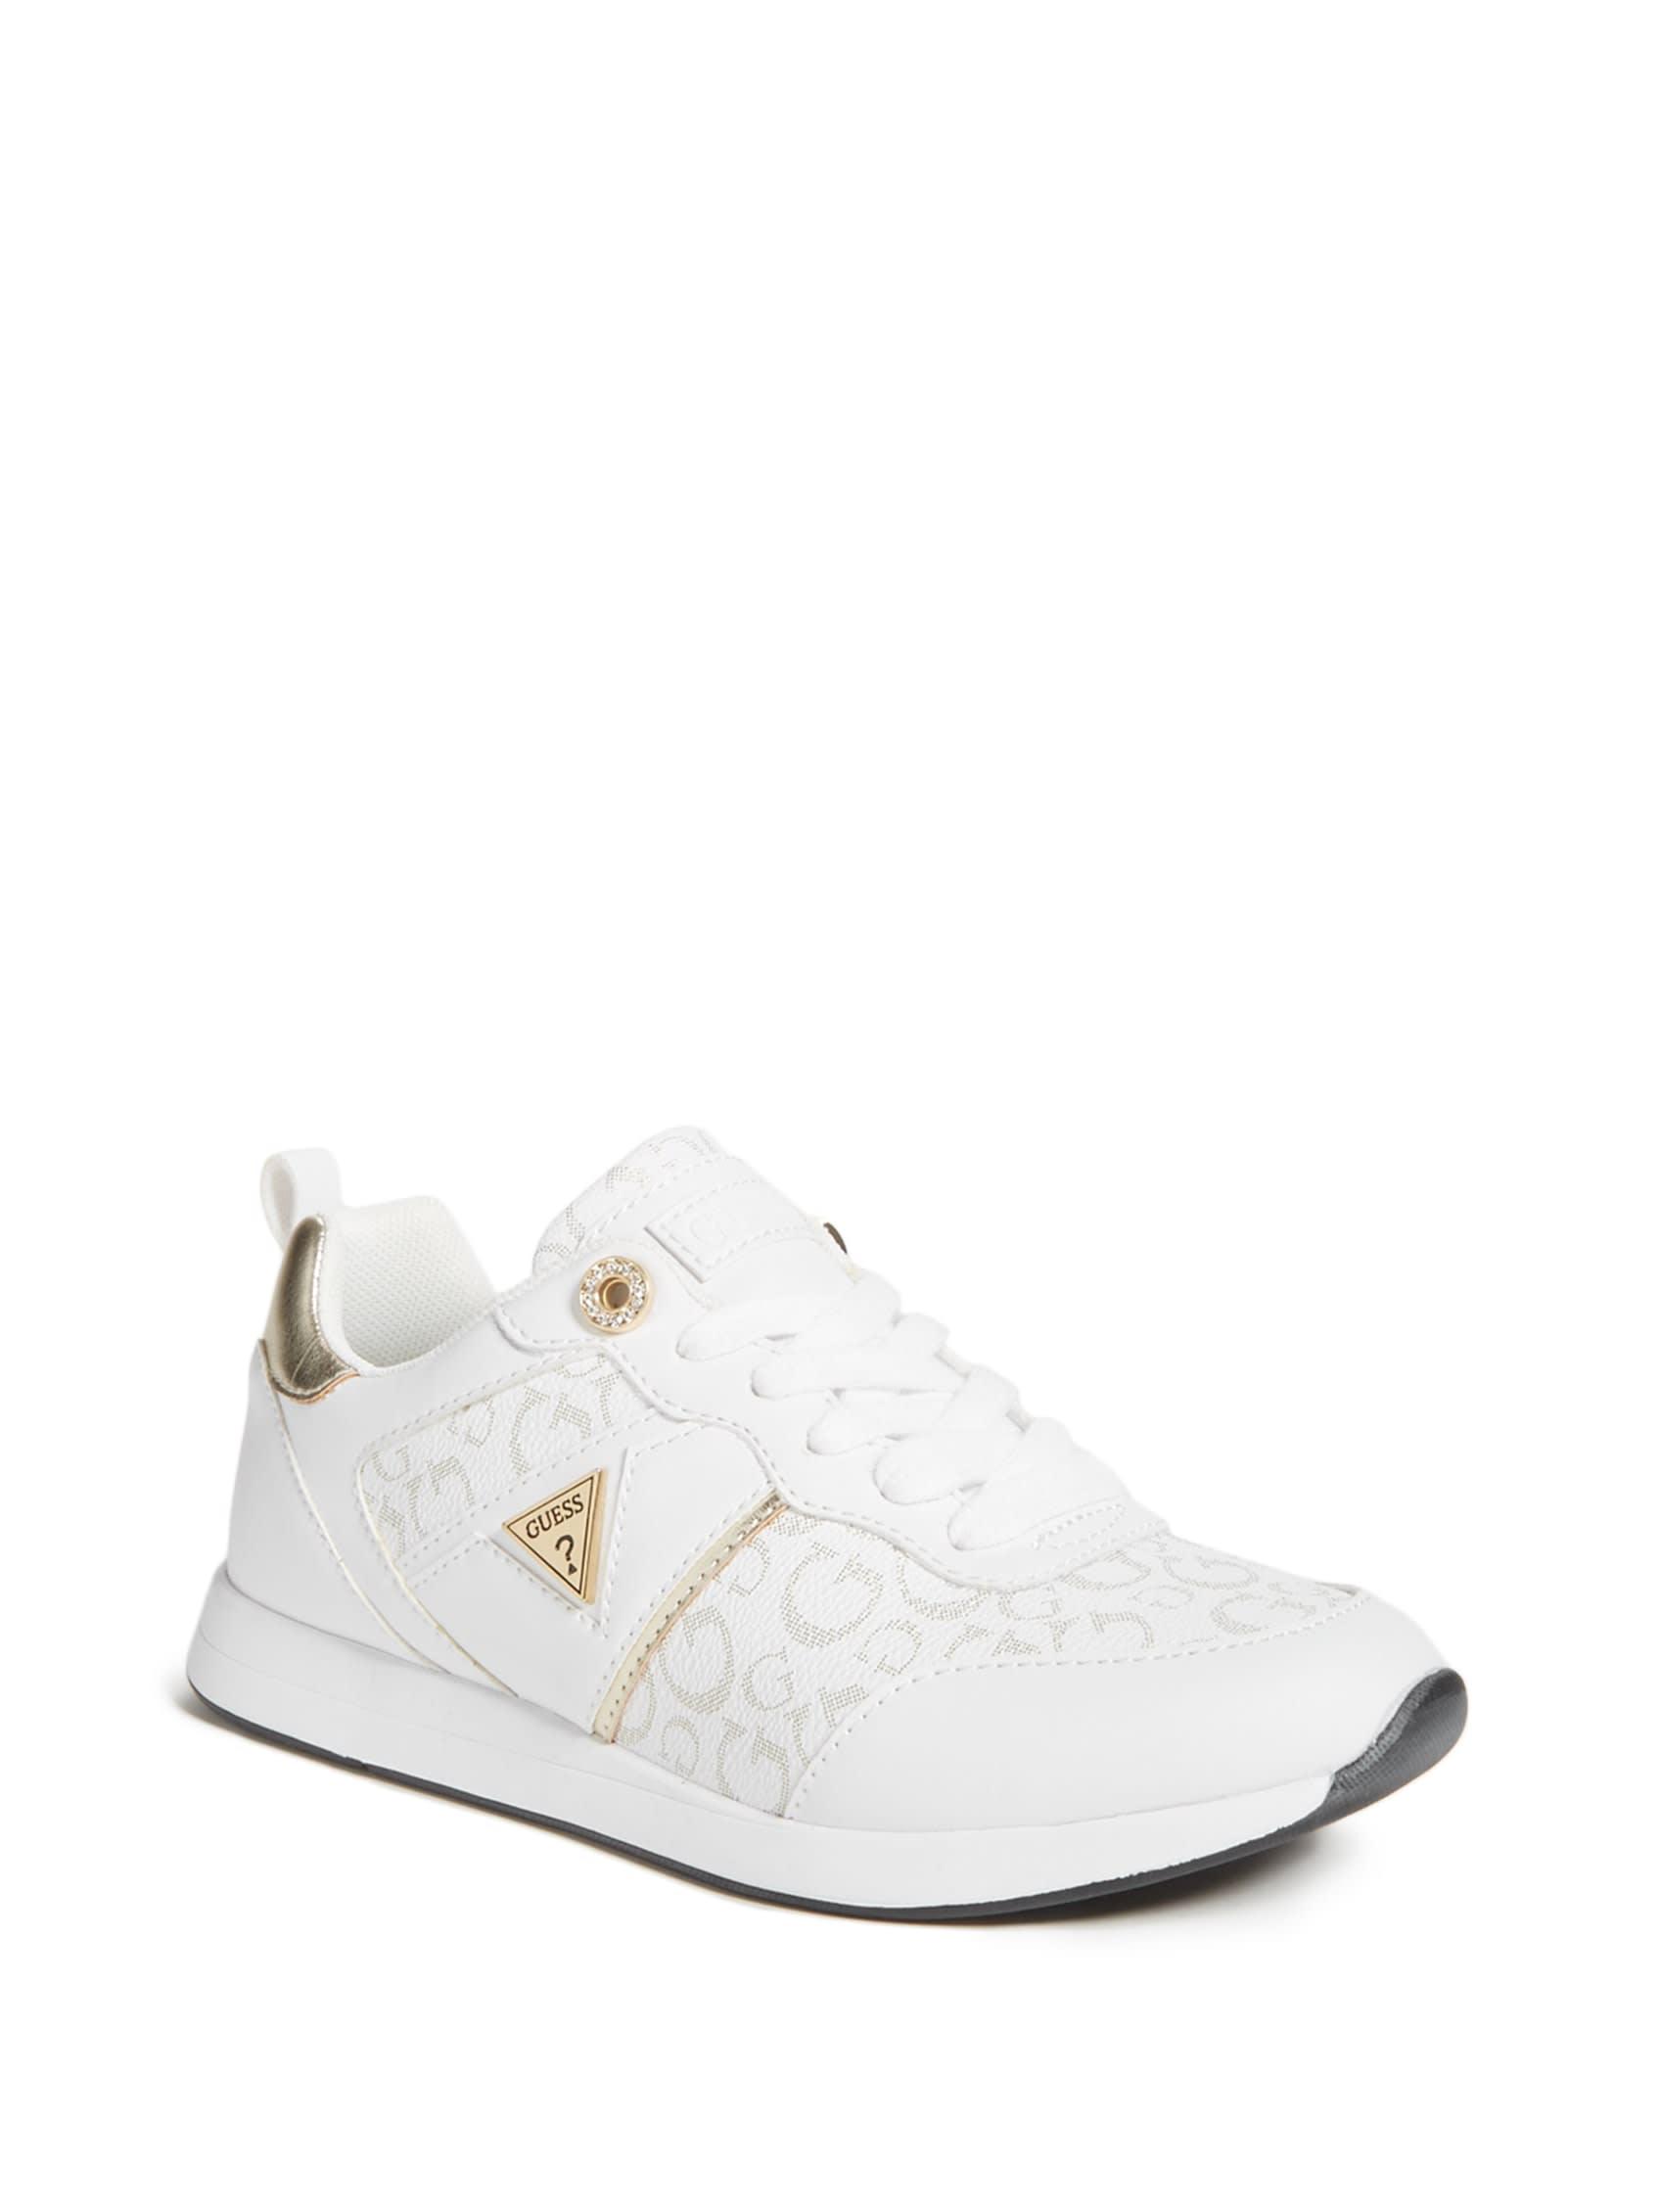 Guess Factory Jaelynn Logo-print Sneakers in White | Lyst